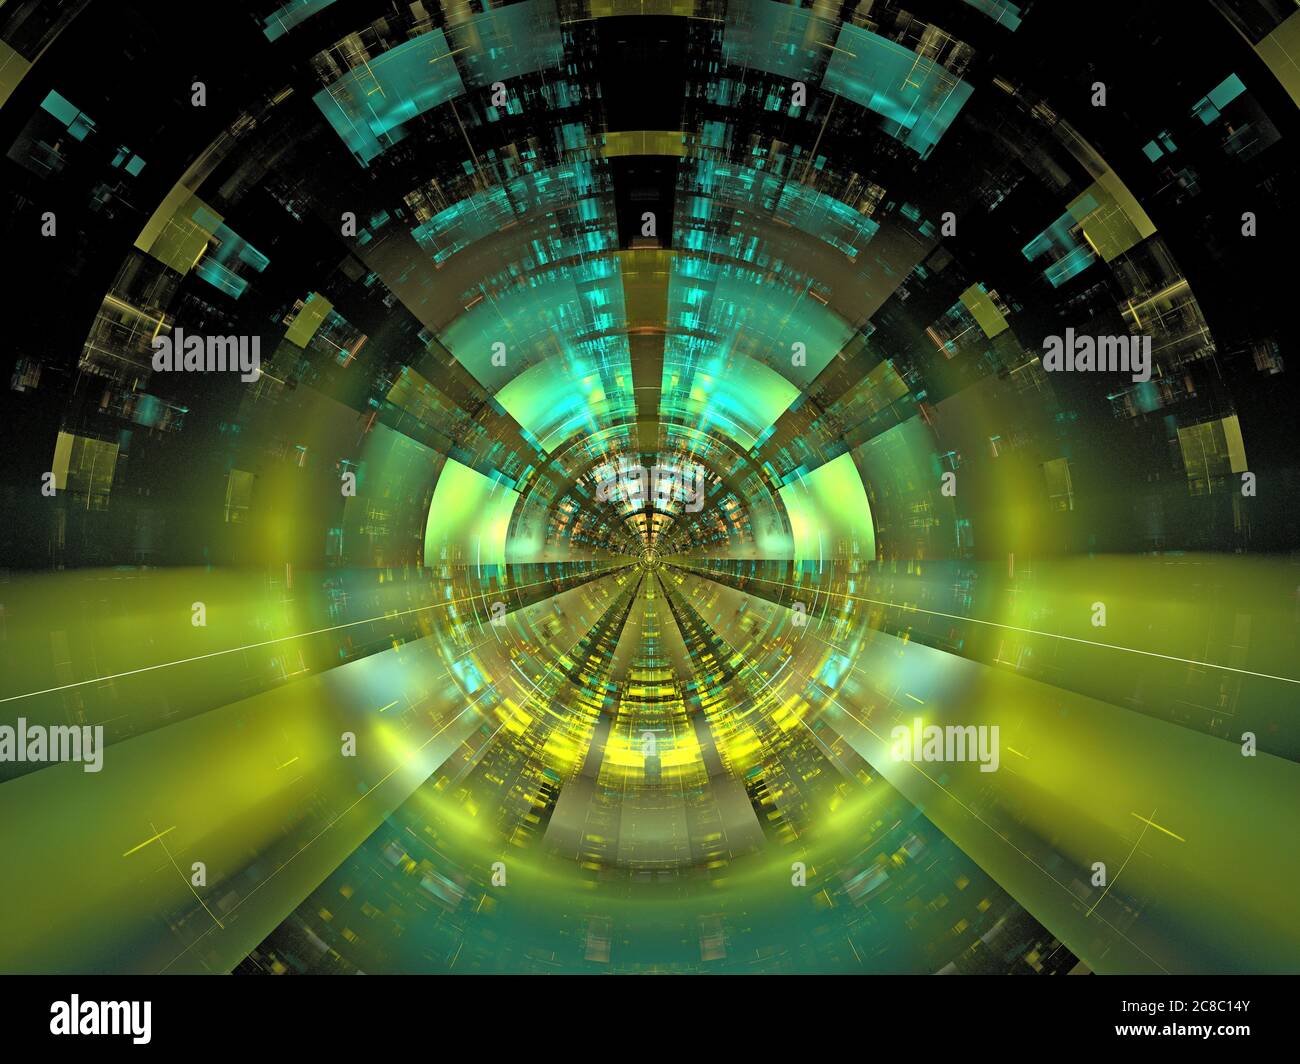 Abstract Flame Fractal Art - Hadron Collider, Sci Fi Background, Information Technology Concept Stock Photo